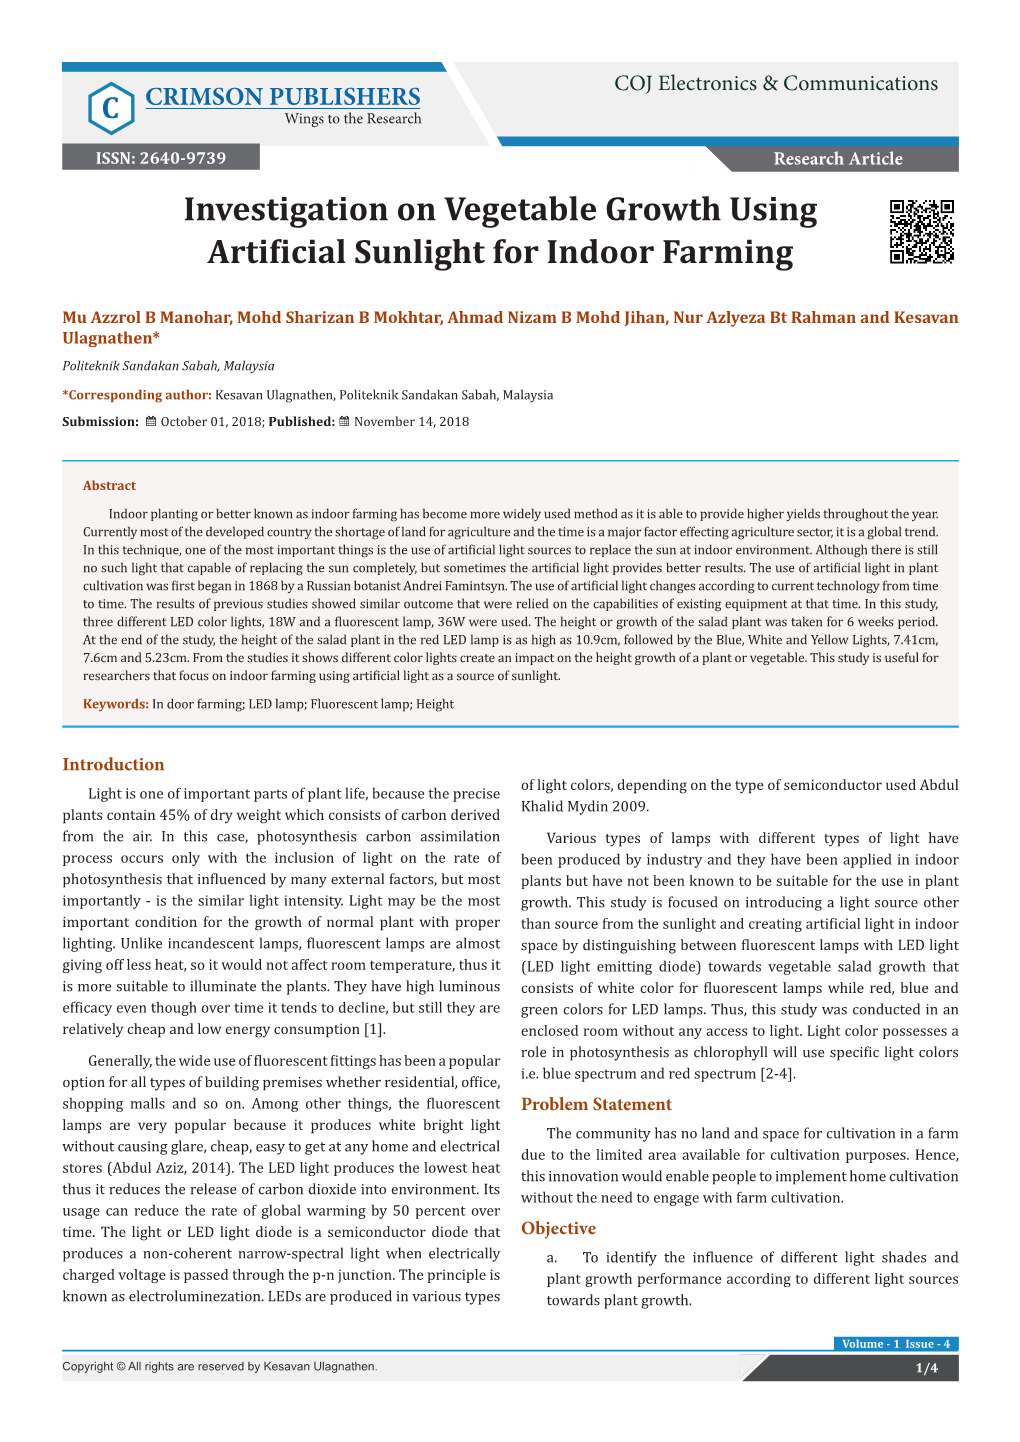 Investigation on Vegetable Growth Using Artificial Sunlight for Indoor Farming